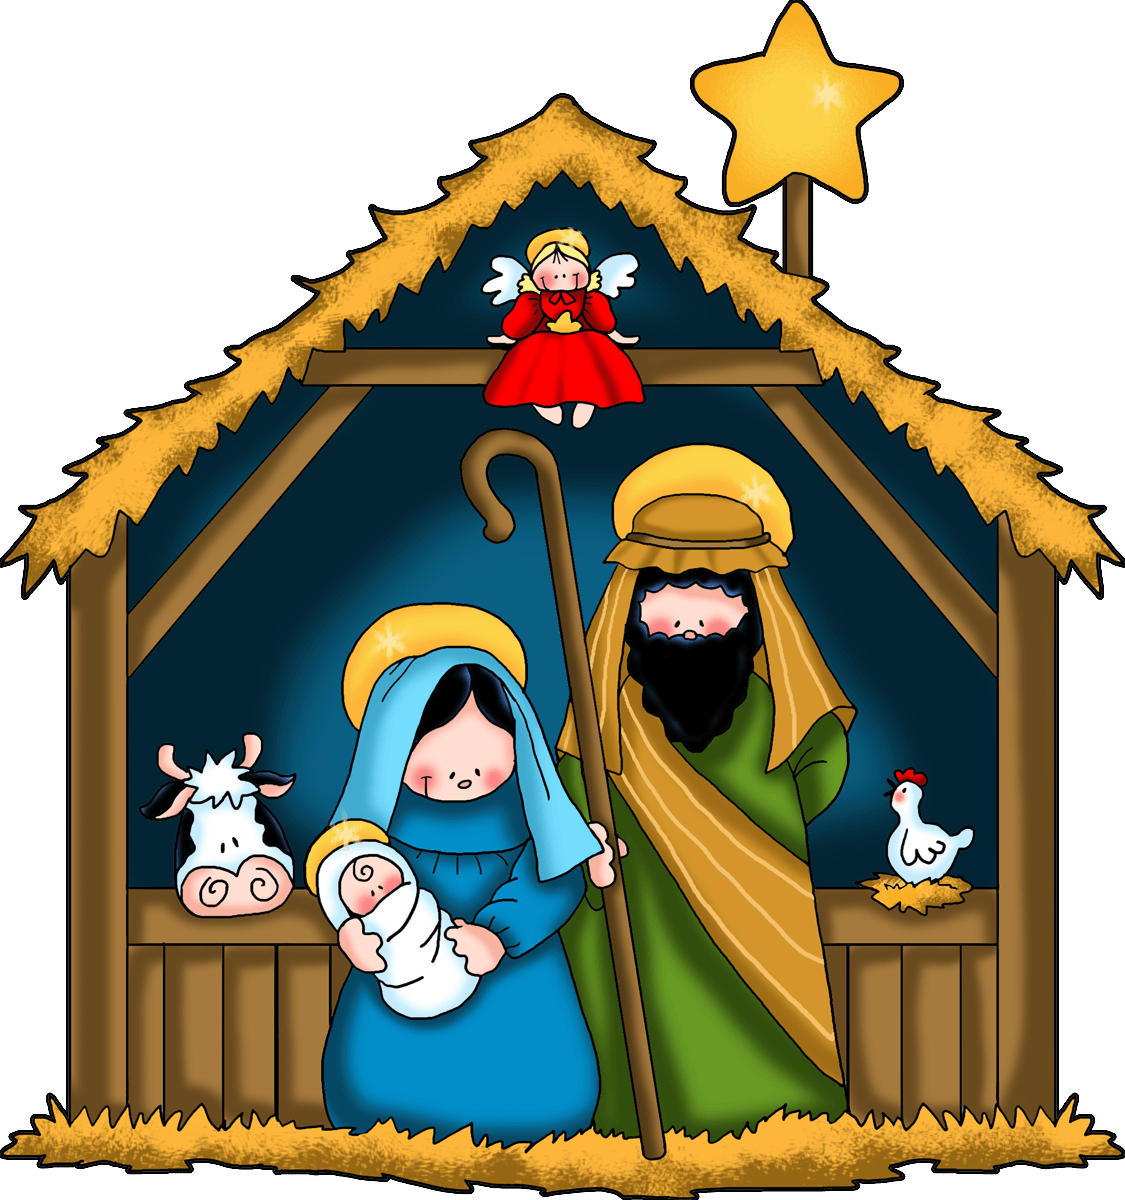 Free Lds Nativity Cliparts, Download Free Clip Art, Free Clip Art on.